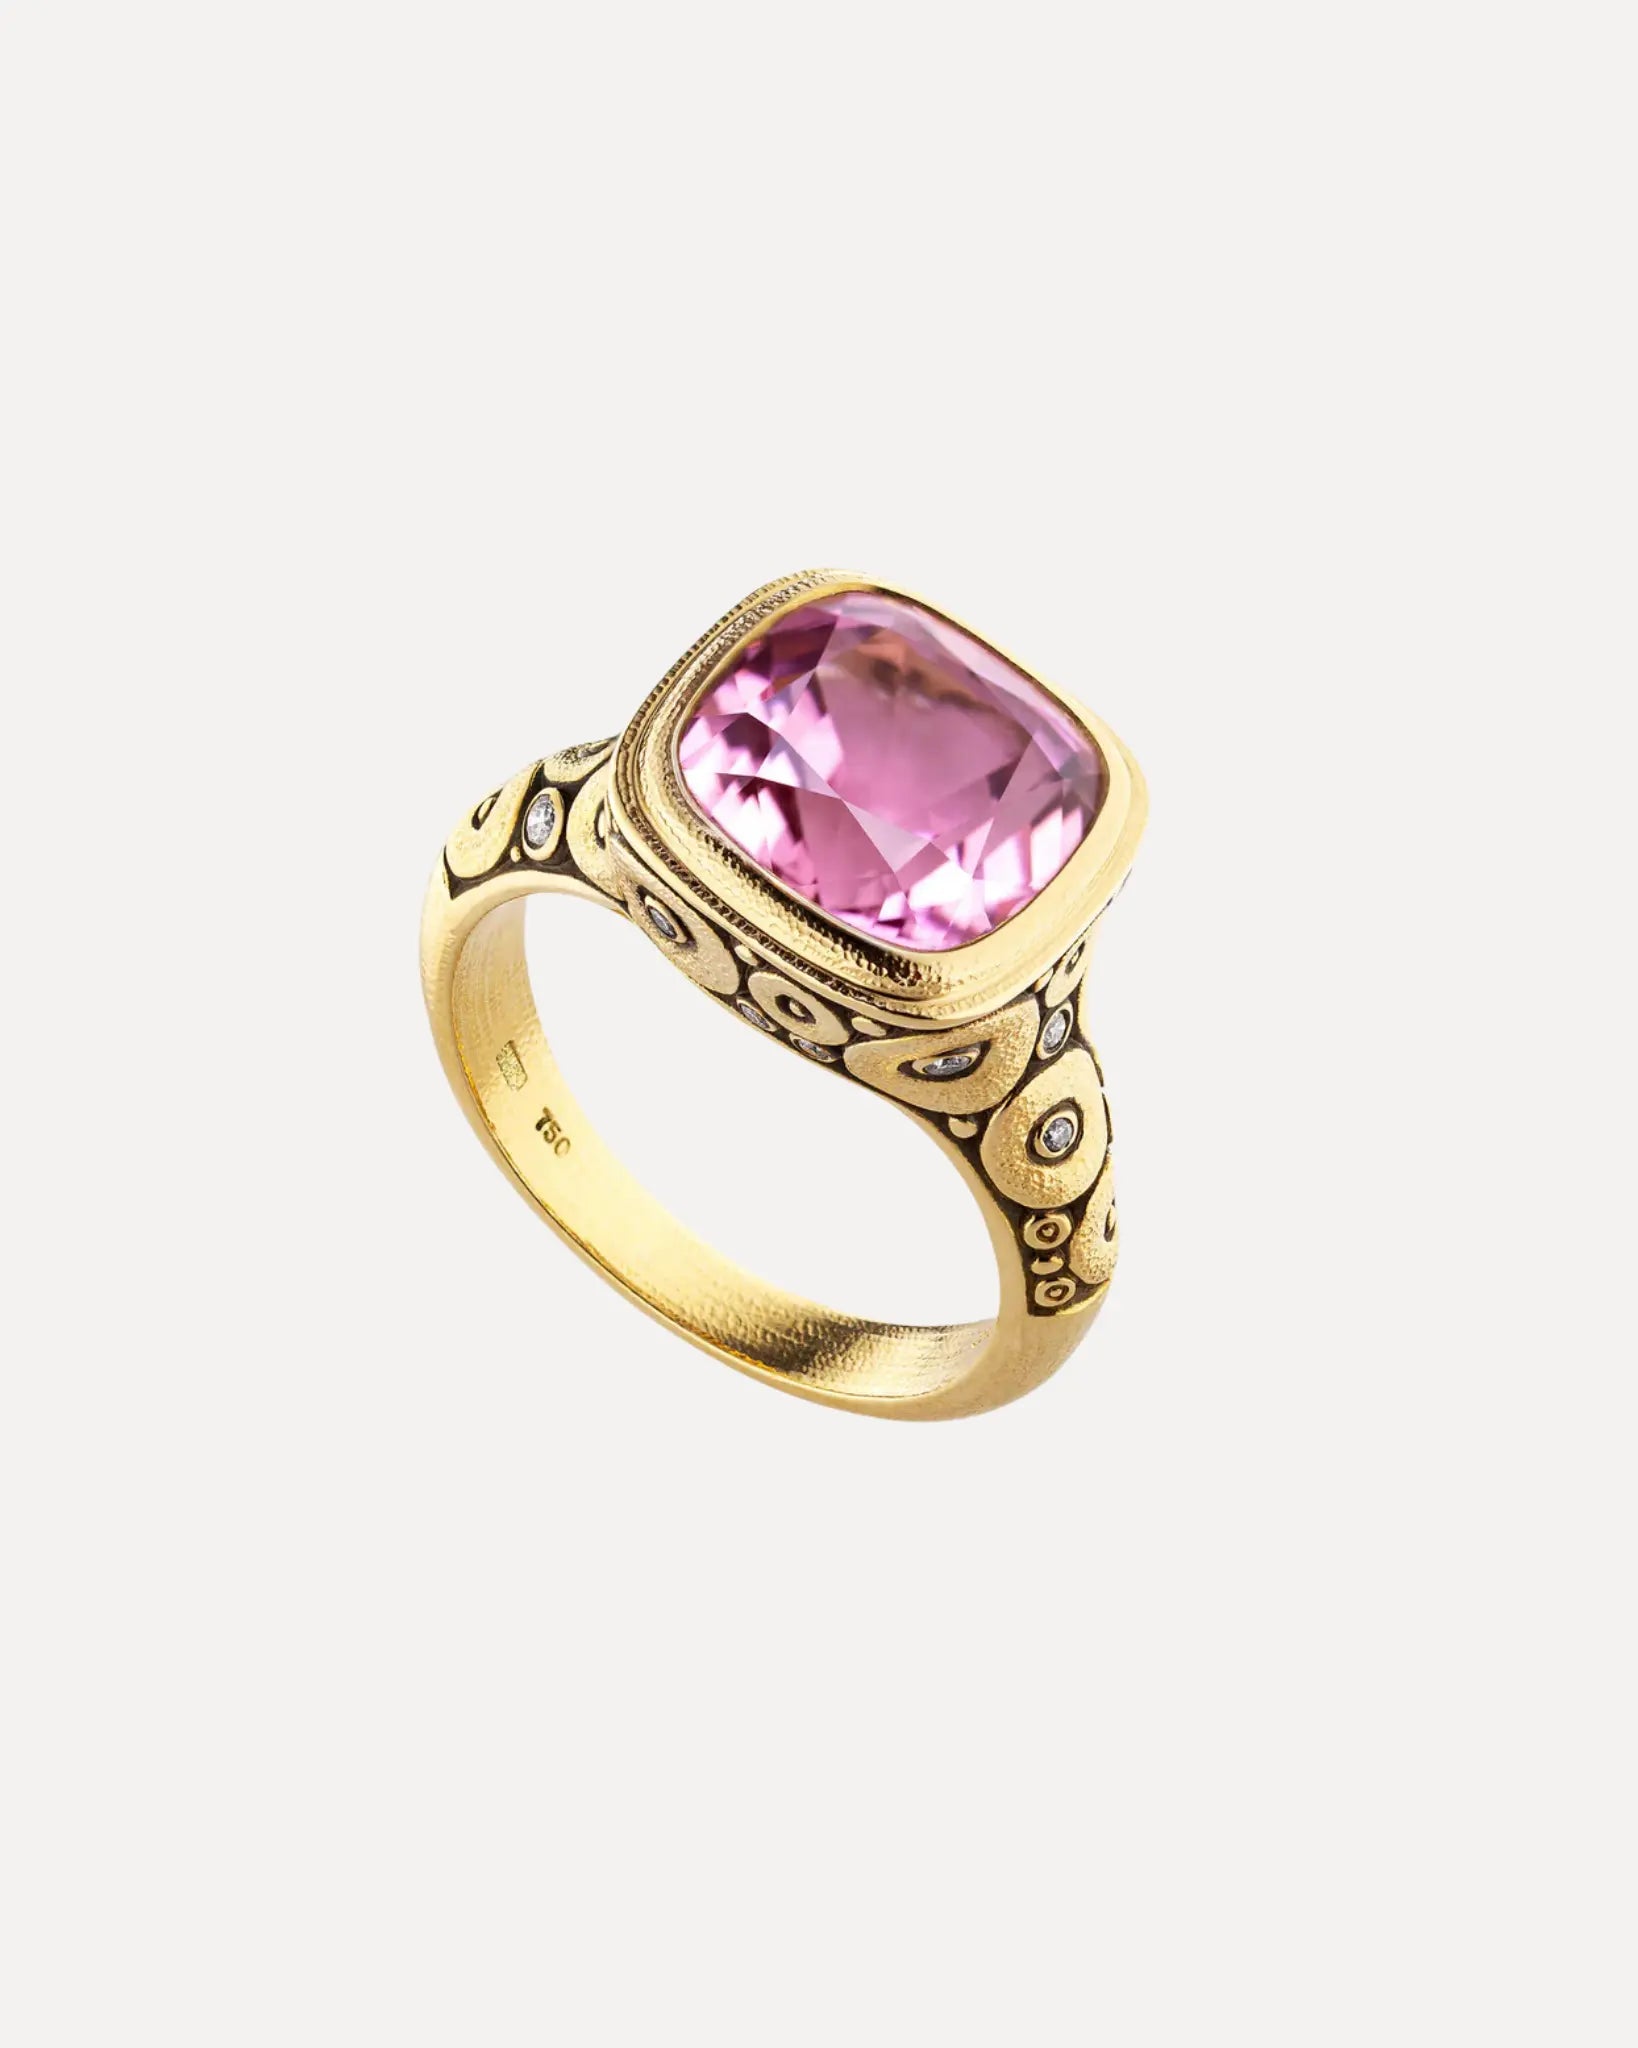 One of a Kind Pink Tourmaline Ring One of a Kind Pink Tourmaline Ring Alex Sepkus Alex Sepkus  Squash Blossom Vail